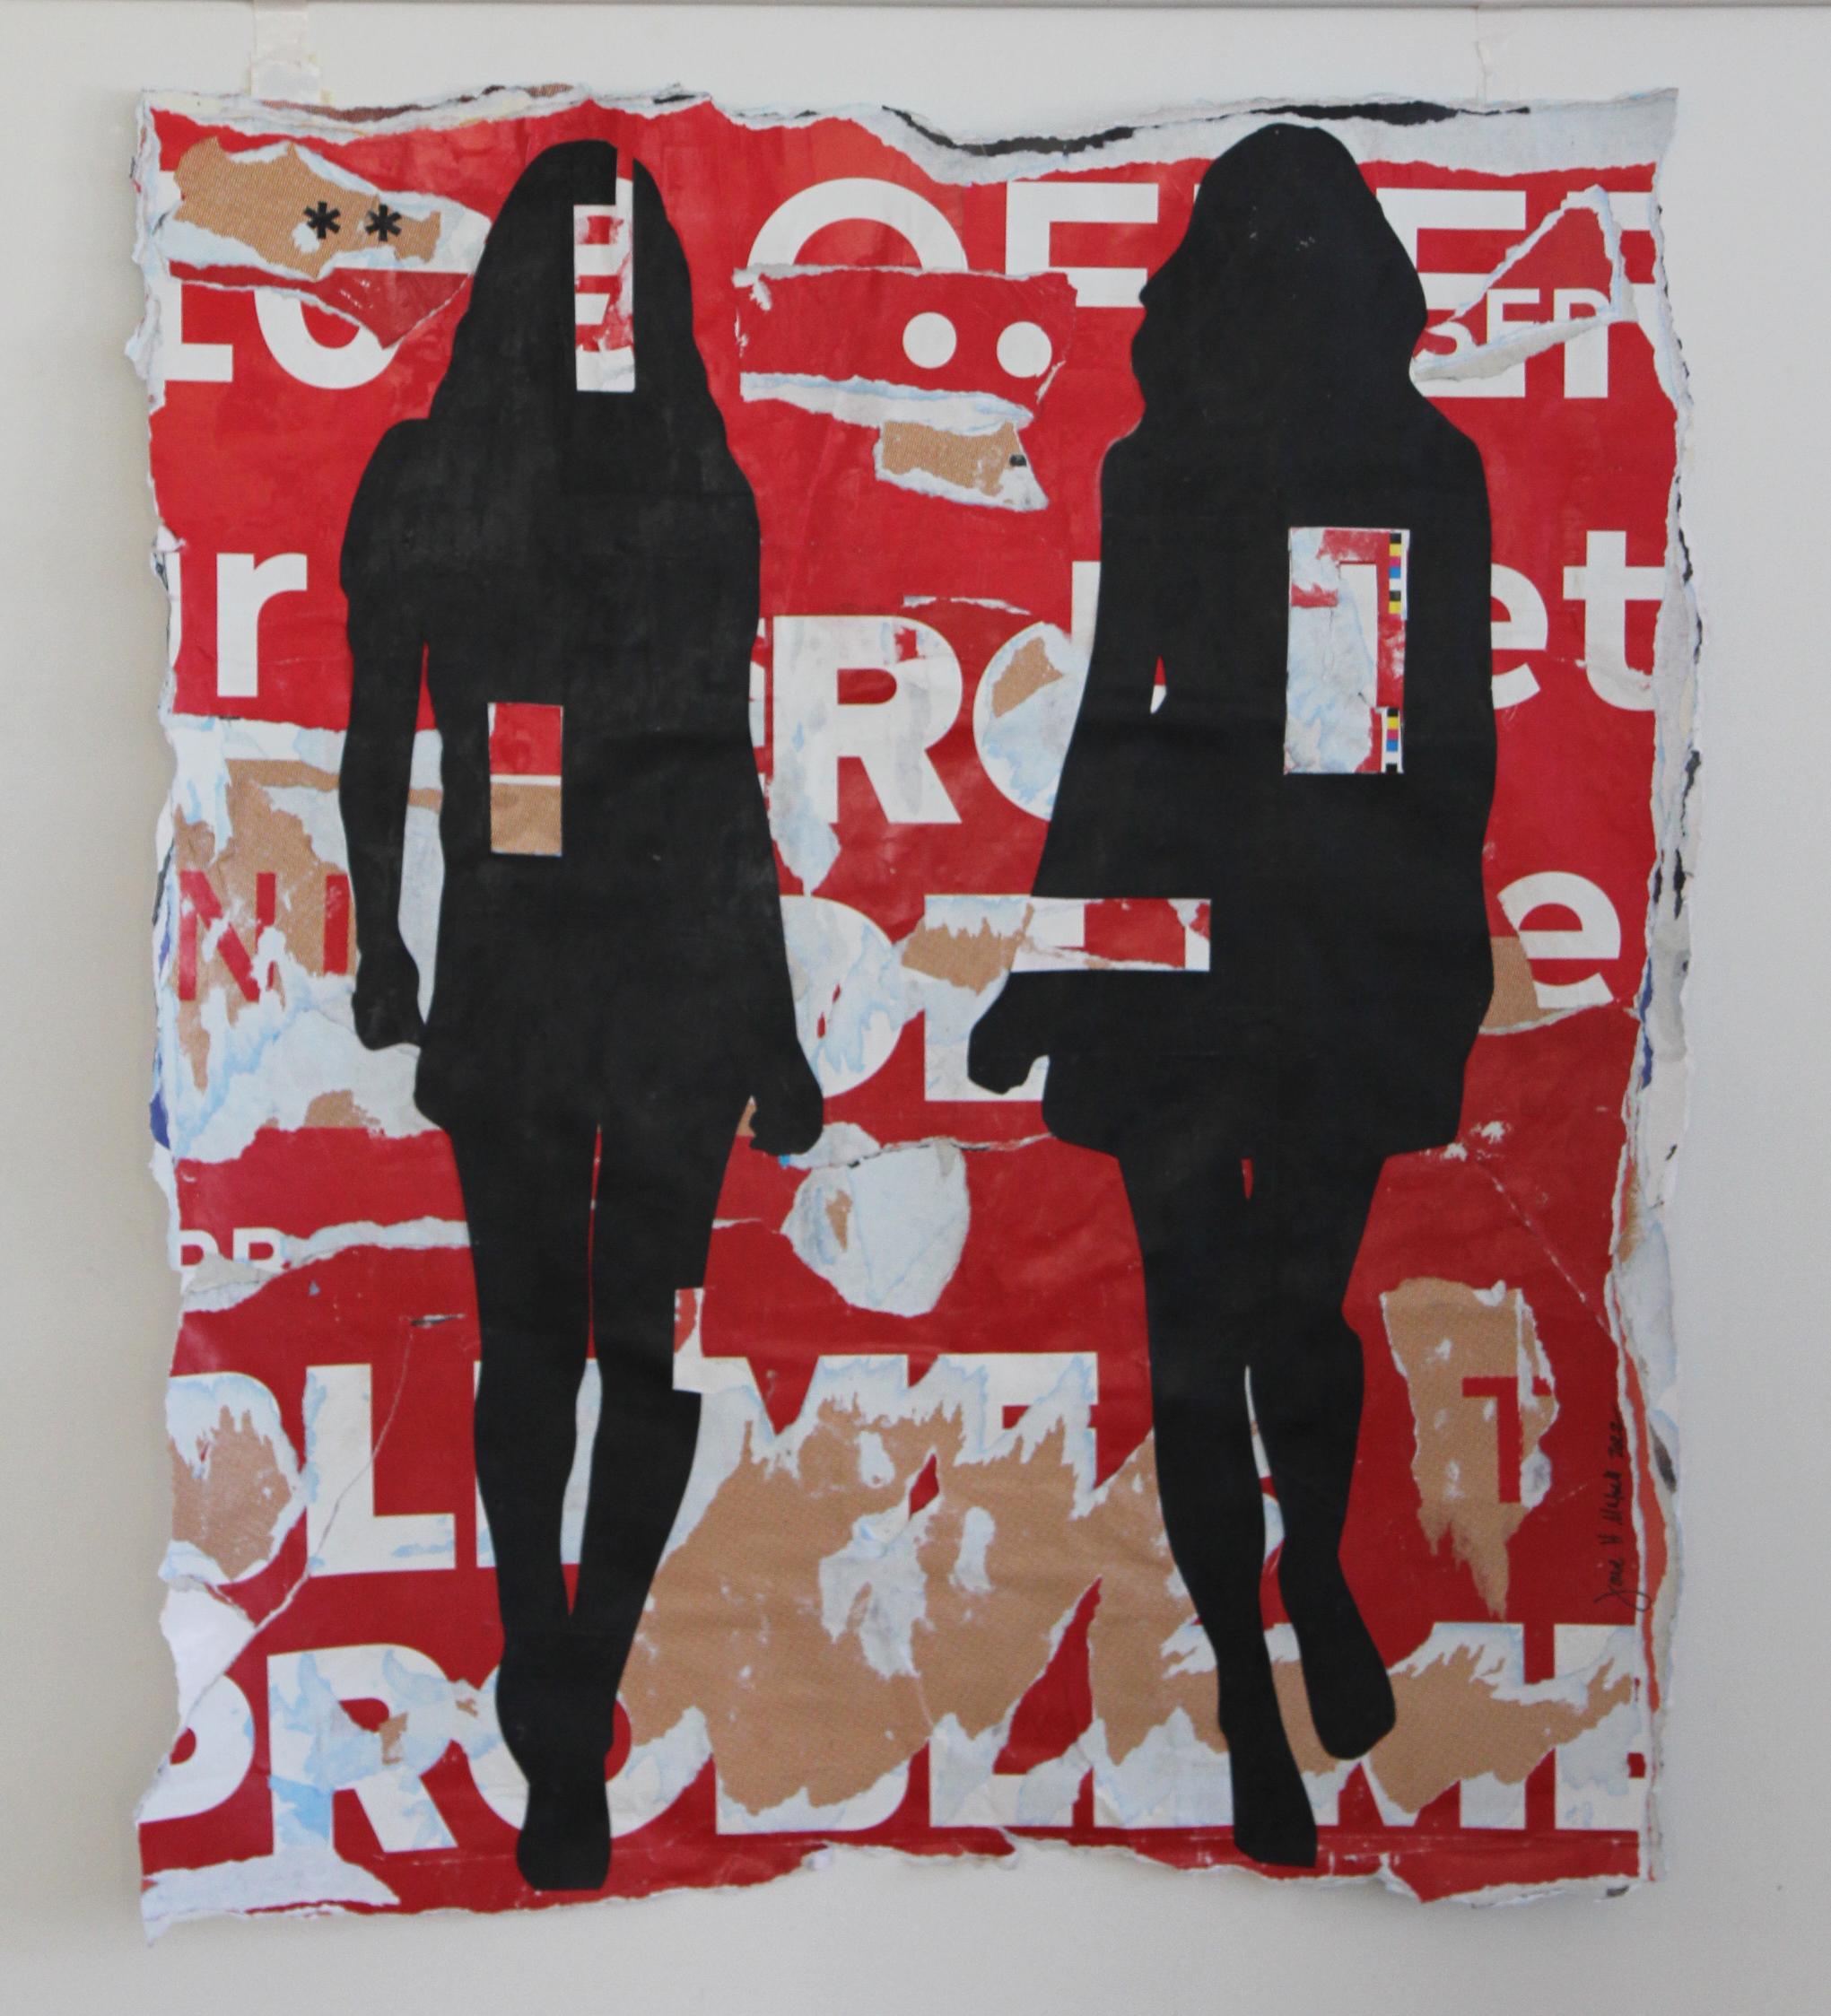 JANE MAXWELL
"Red Billboard"
Mixed Media on Paper
37" x 31" Unframed ; 42.5" x 35.5" Framed

Jane Maxwell’s artwork approaches the female body with an affectionate and celebratory feminist perspective. Extending her focus on female empowerment and